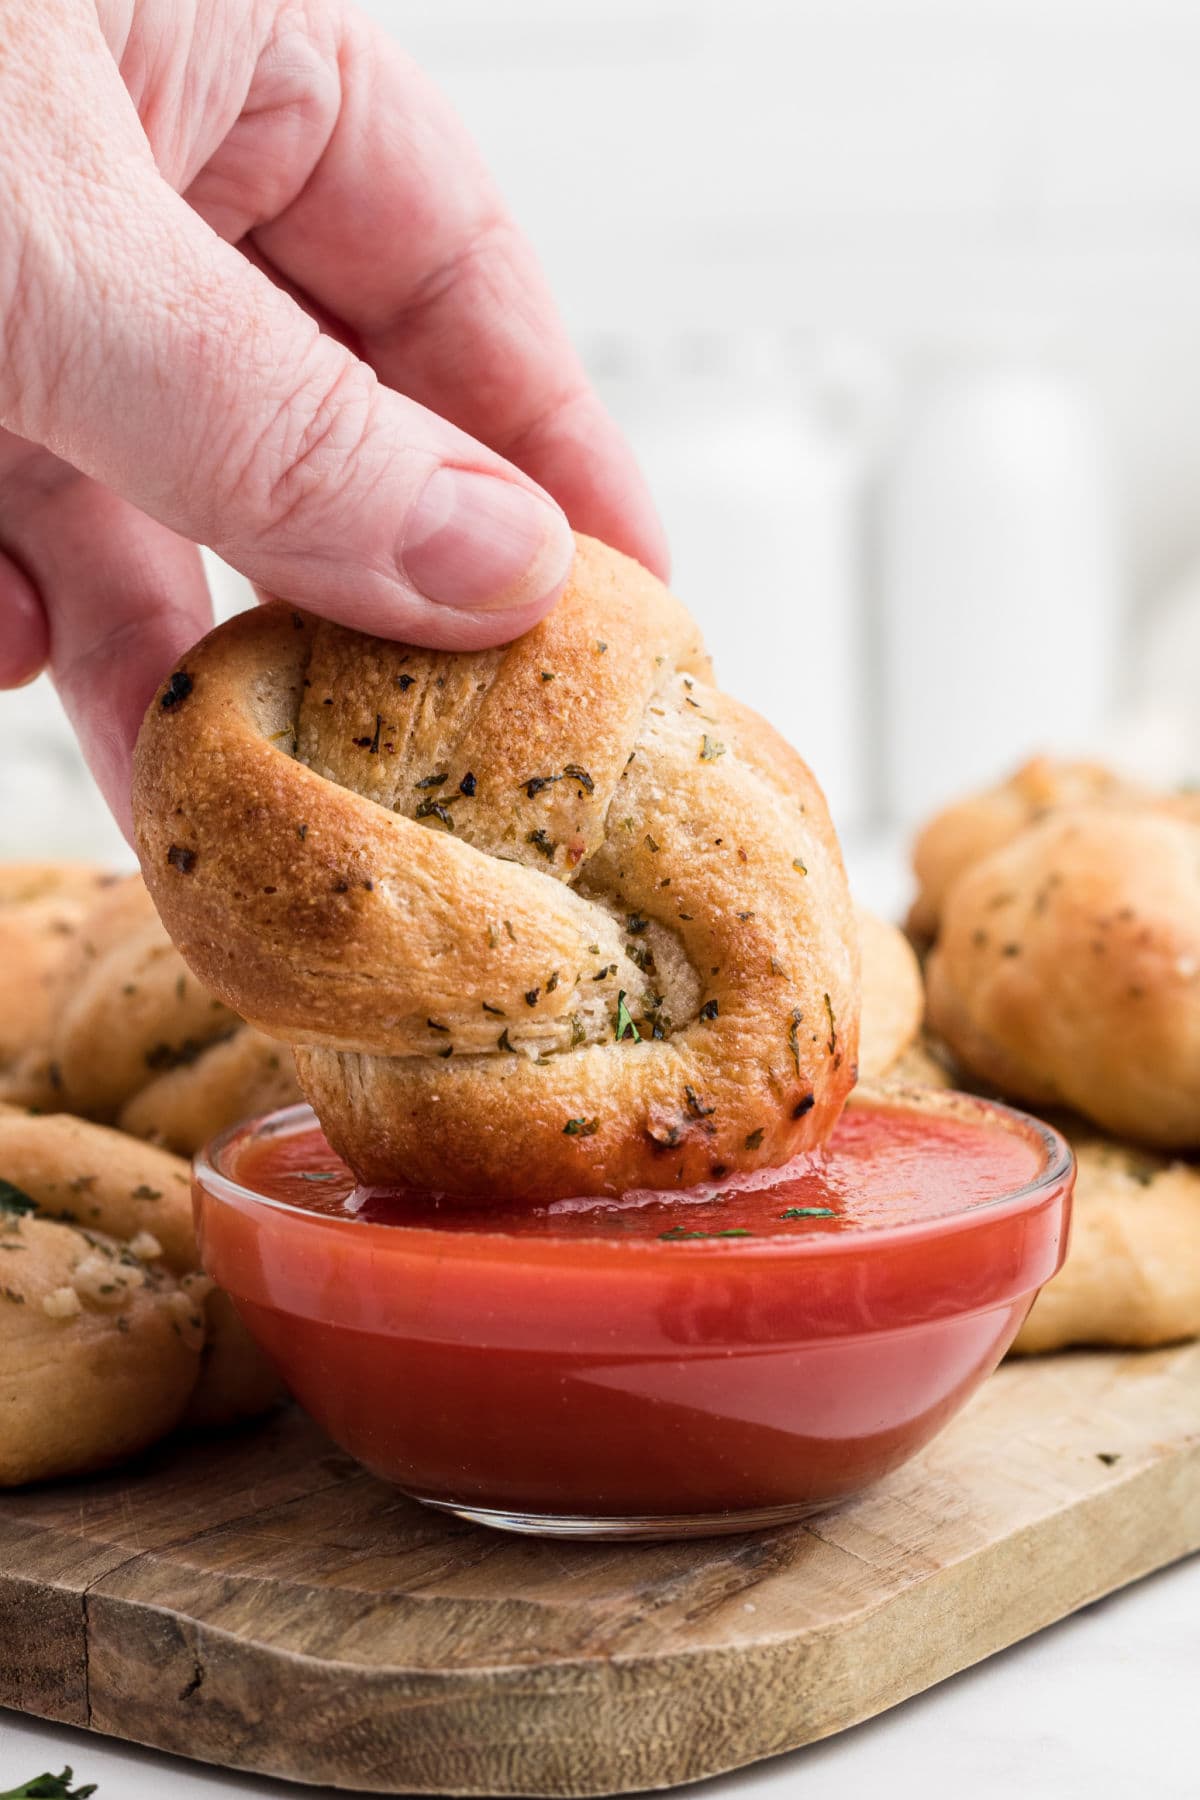 A hand dipping a roll into red marinara sauce.